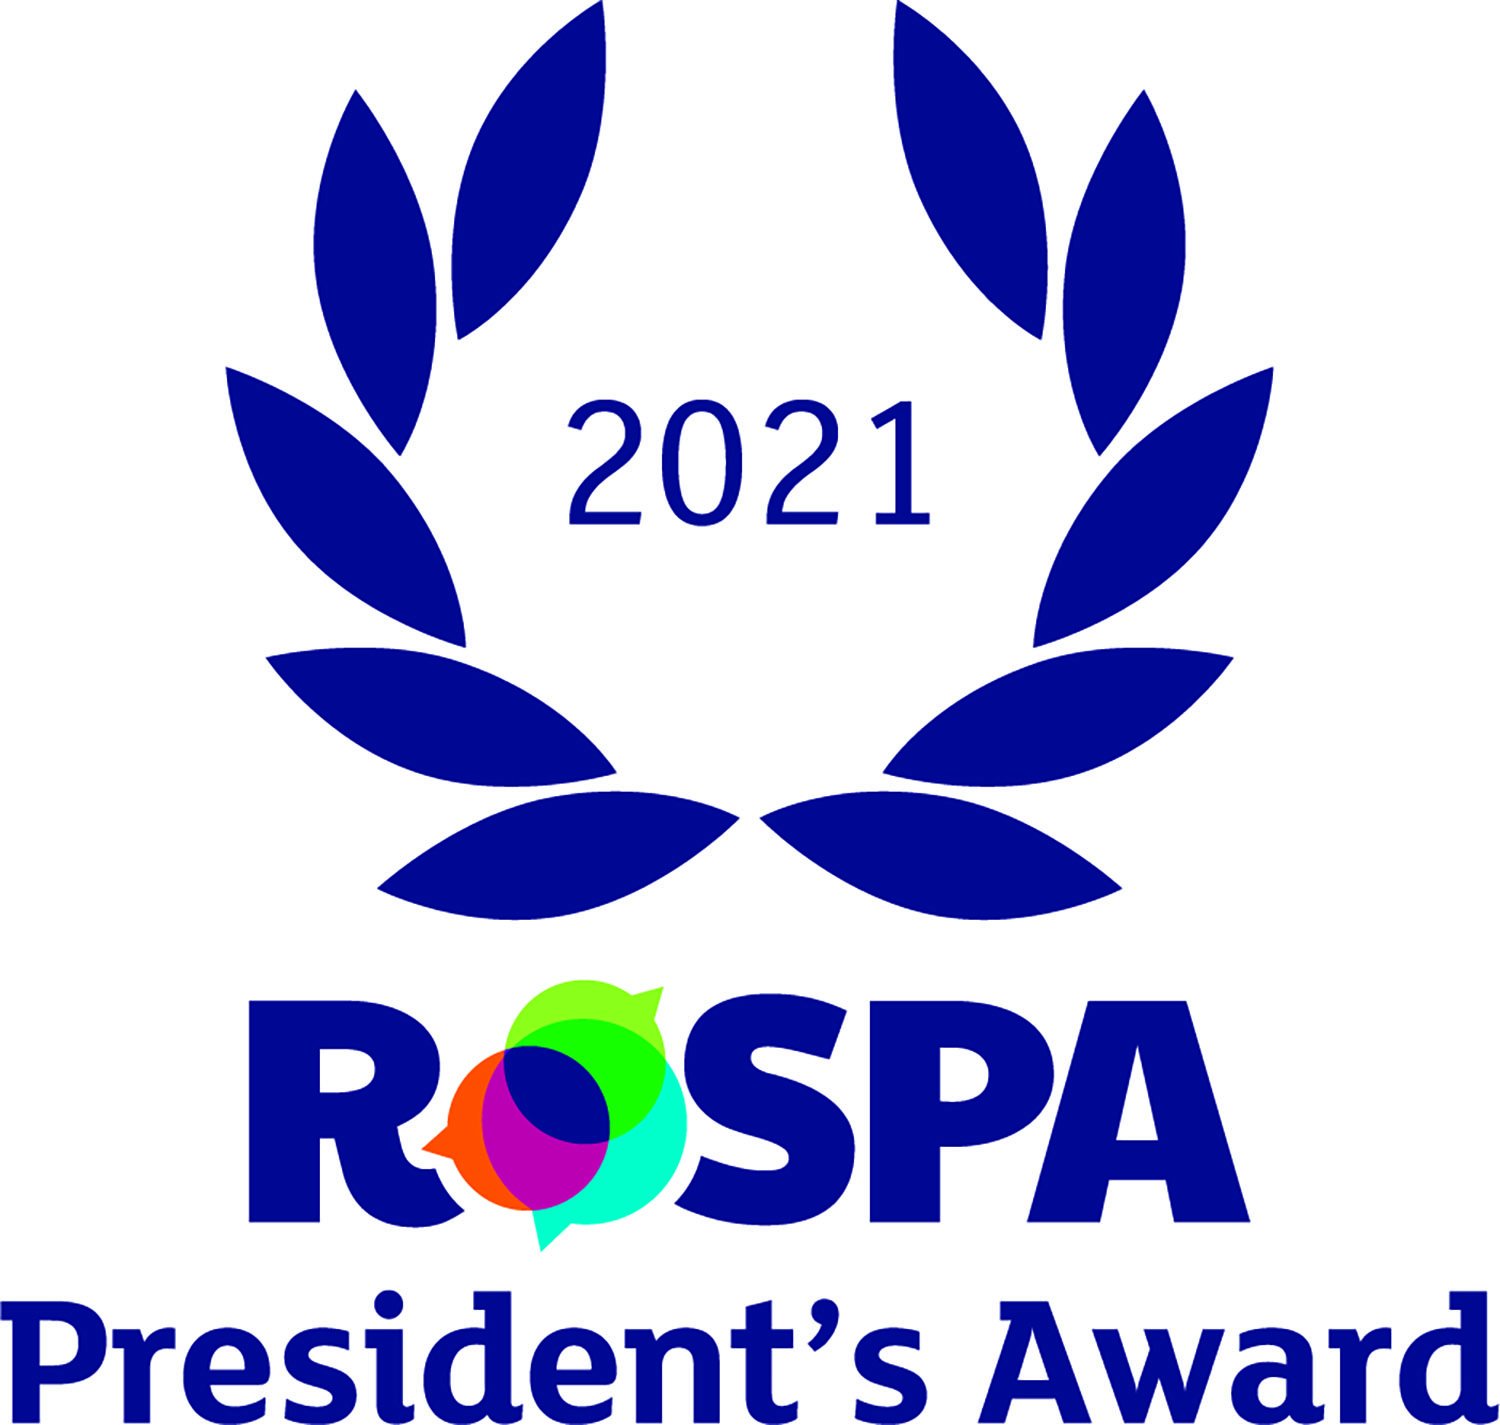 Taking the Gold Award for health & safety performance for the eleventh consecutive year has secured the President’s Award, which will be presented at a virtual award ceremony taking place on 9 September, 2021.